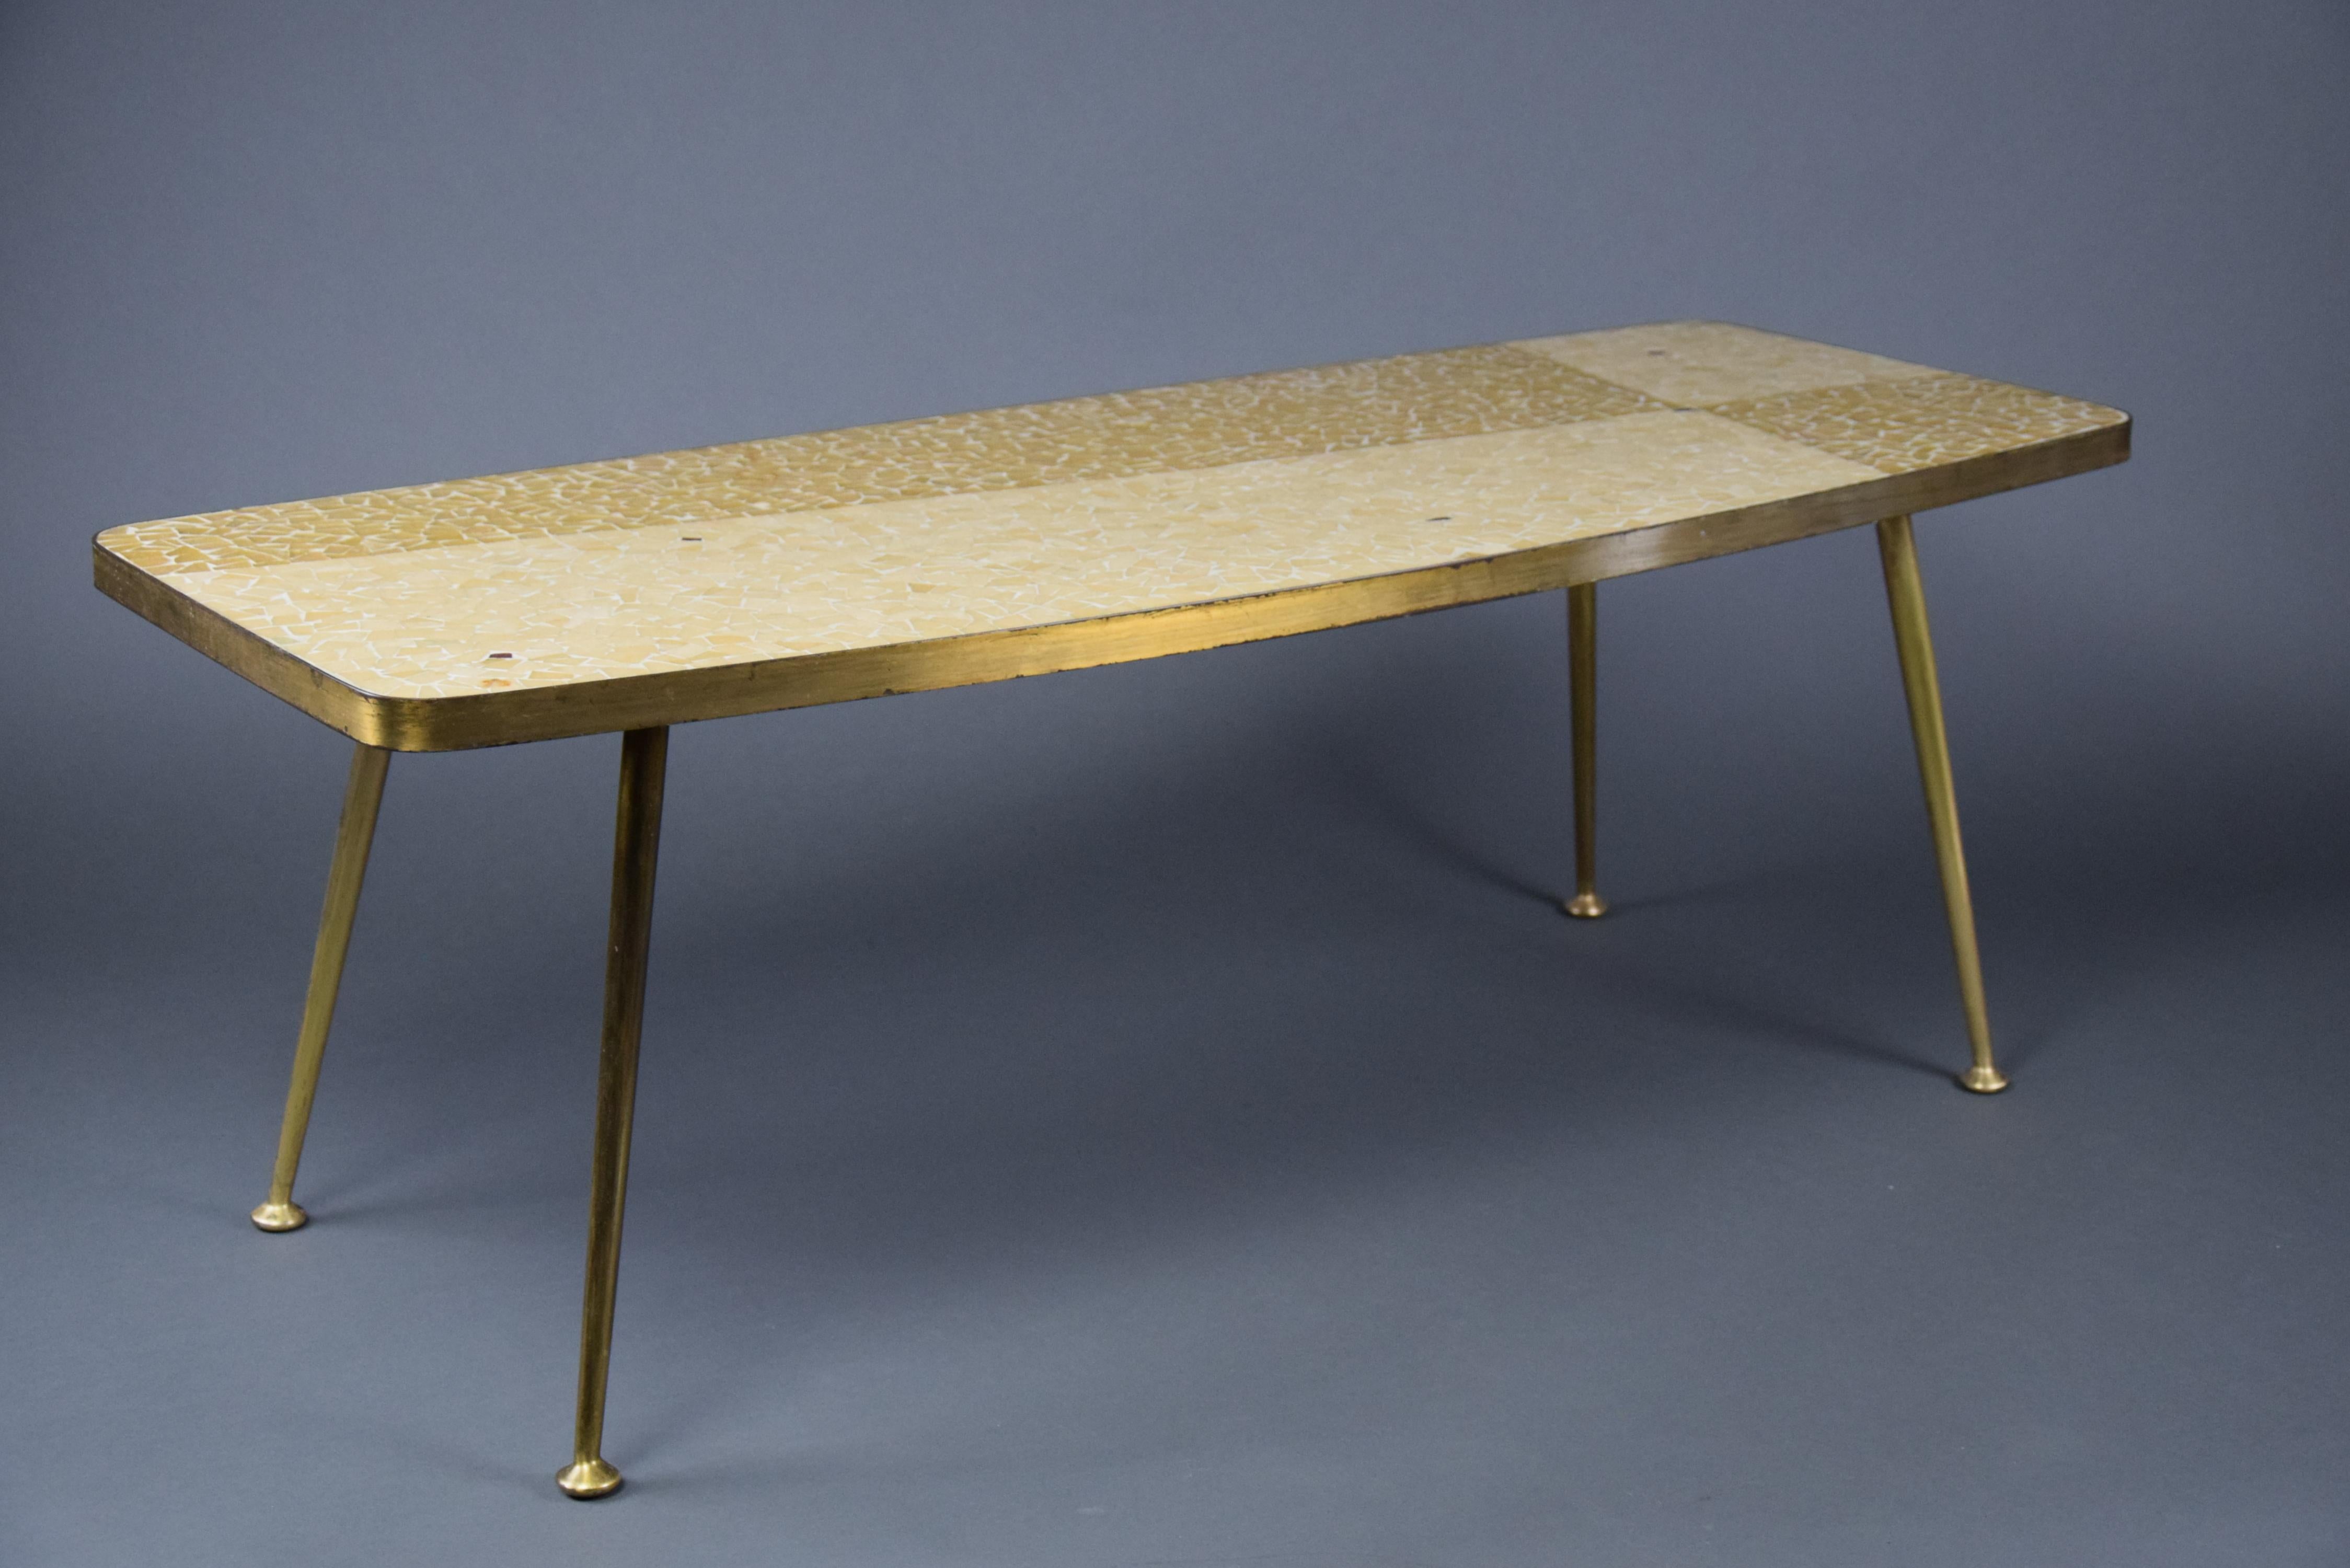 Table basse Berthold Muller Modernity Yellow and Sand Colored Mosaic en vente 2